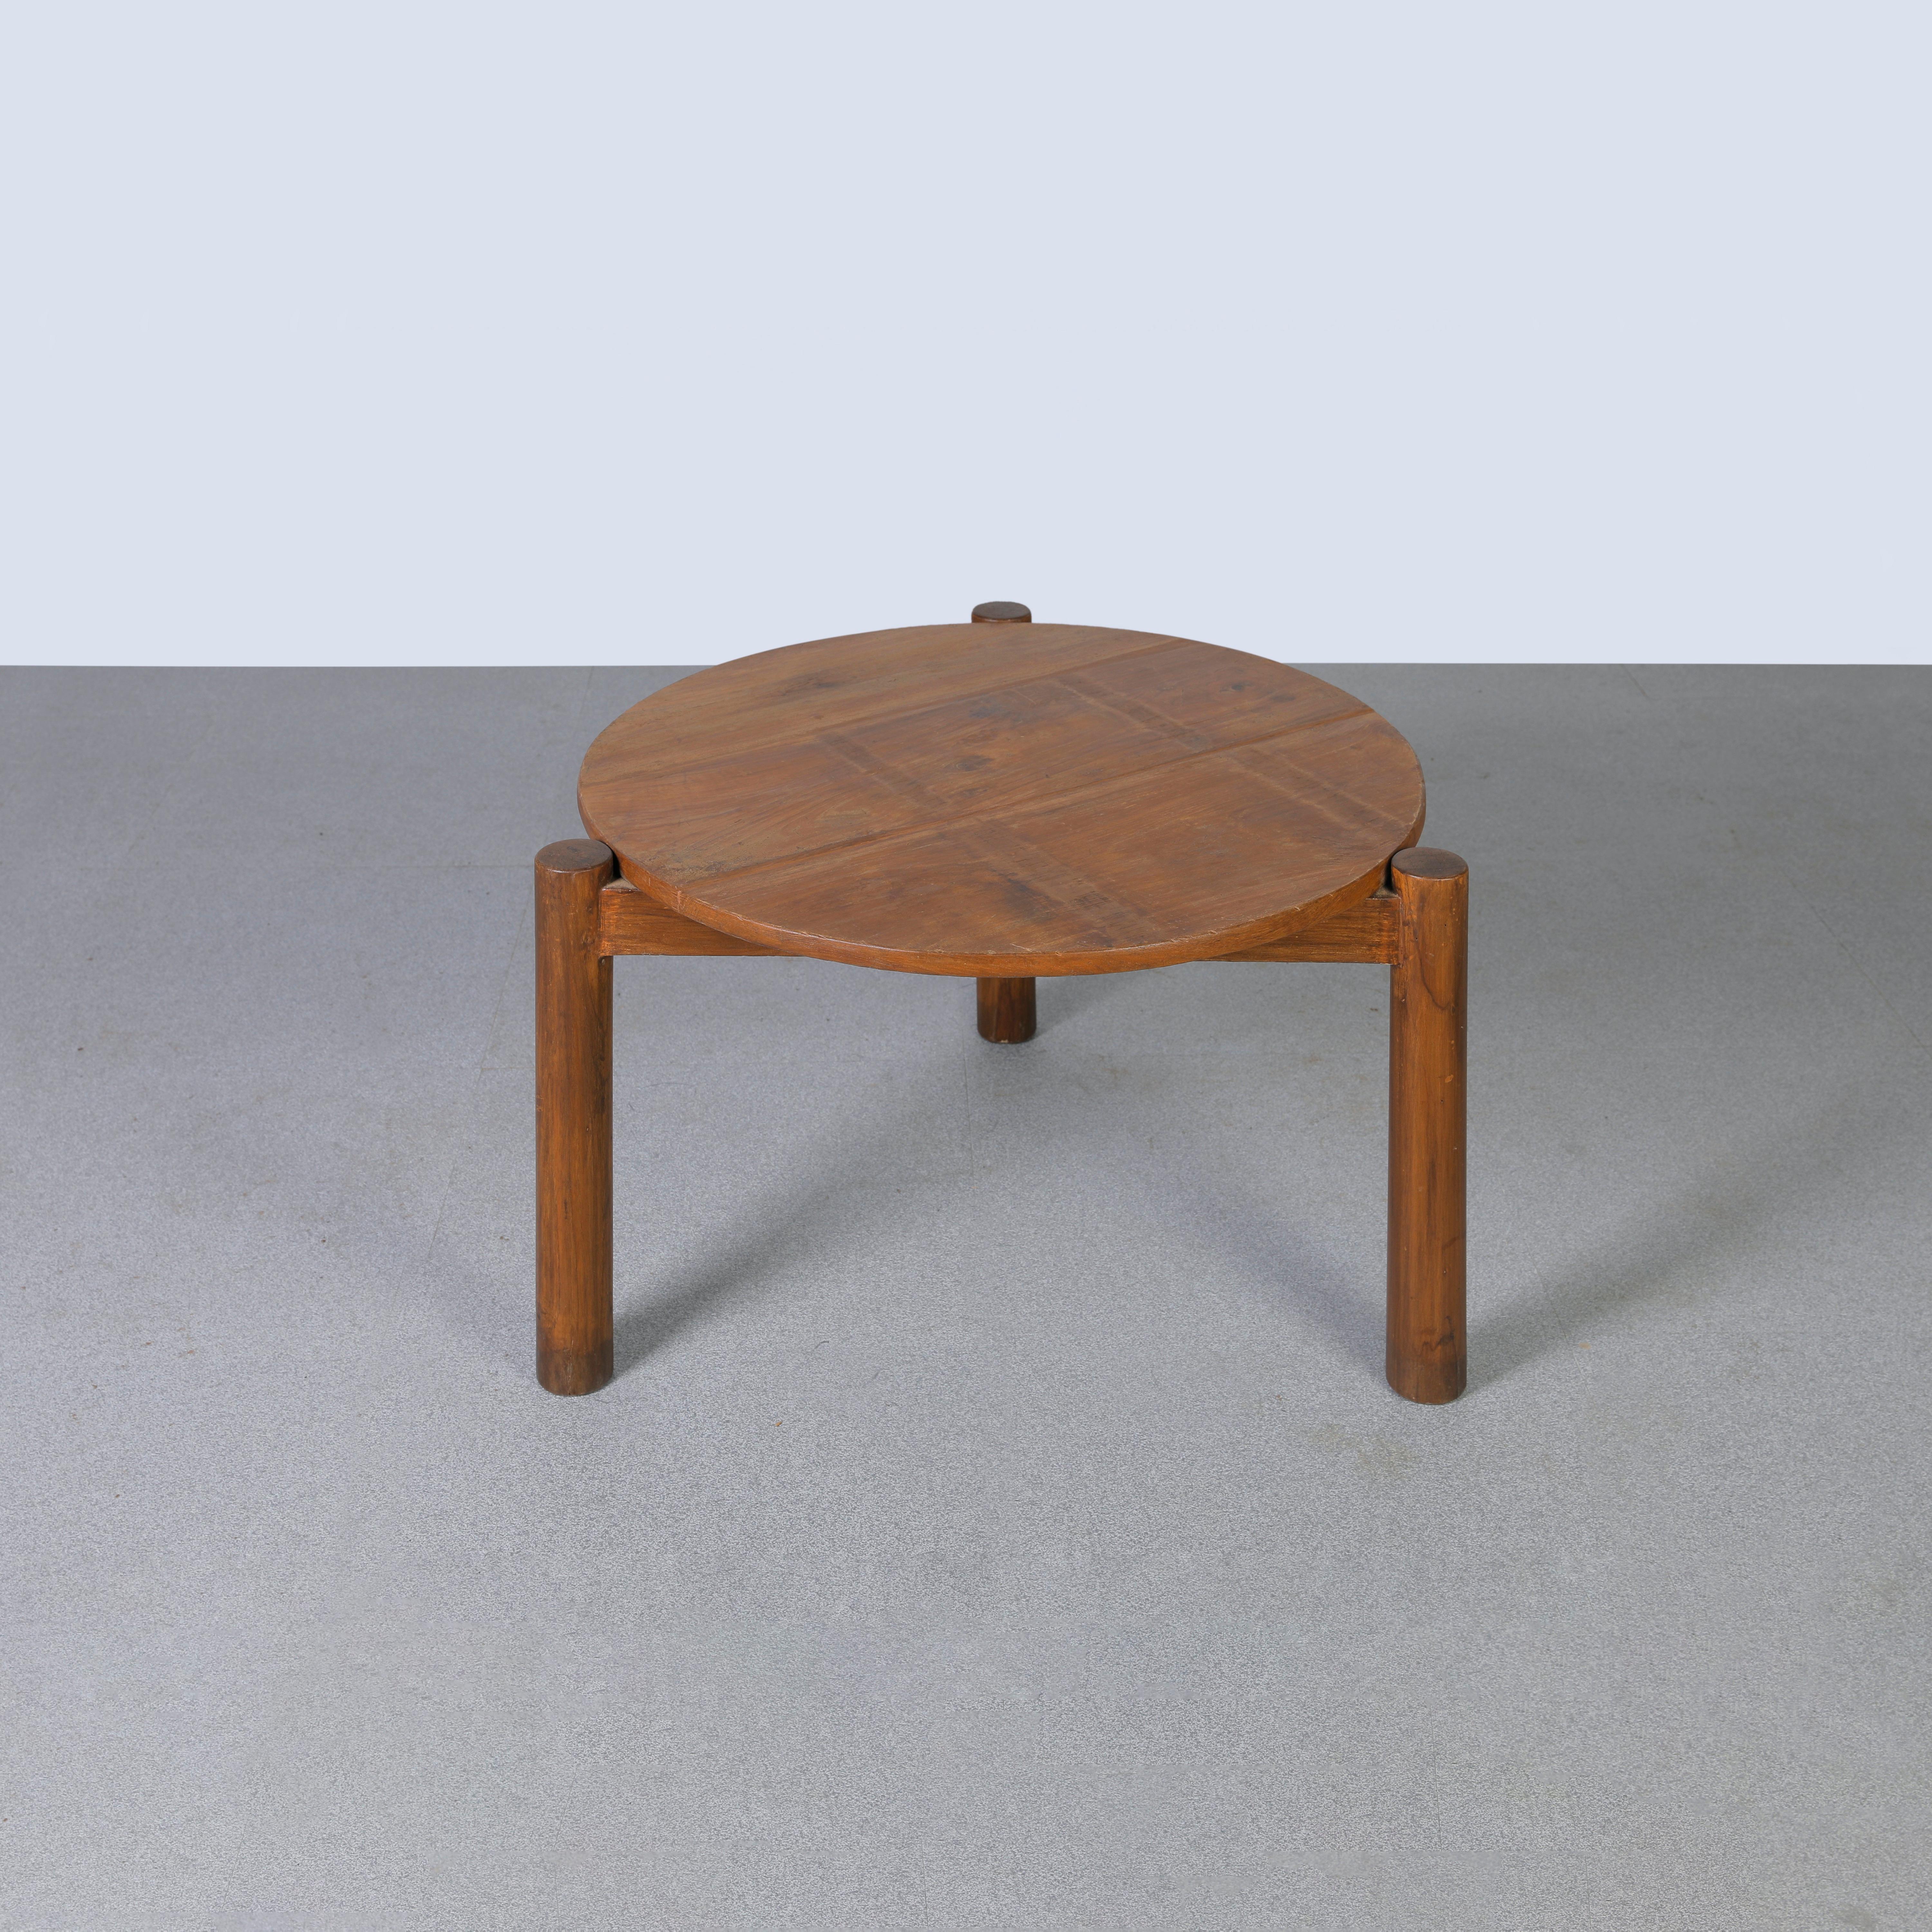 This low round table is an iconic design piece. It is raw in its simplicity and it shows a slightly patinated material. Its shape is beautifully fragile and has a wonderful colour. We don't restore them too much. So we keep as much as possible of